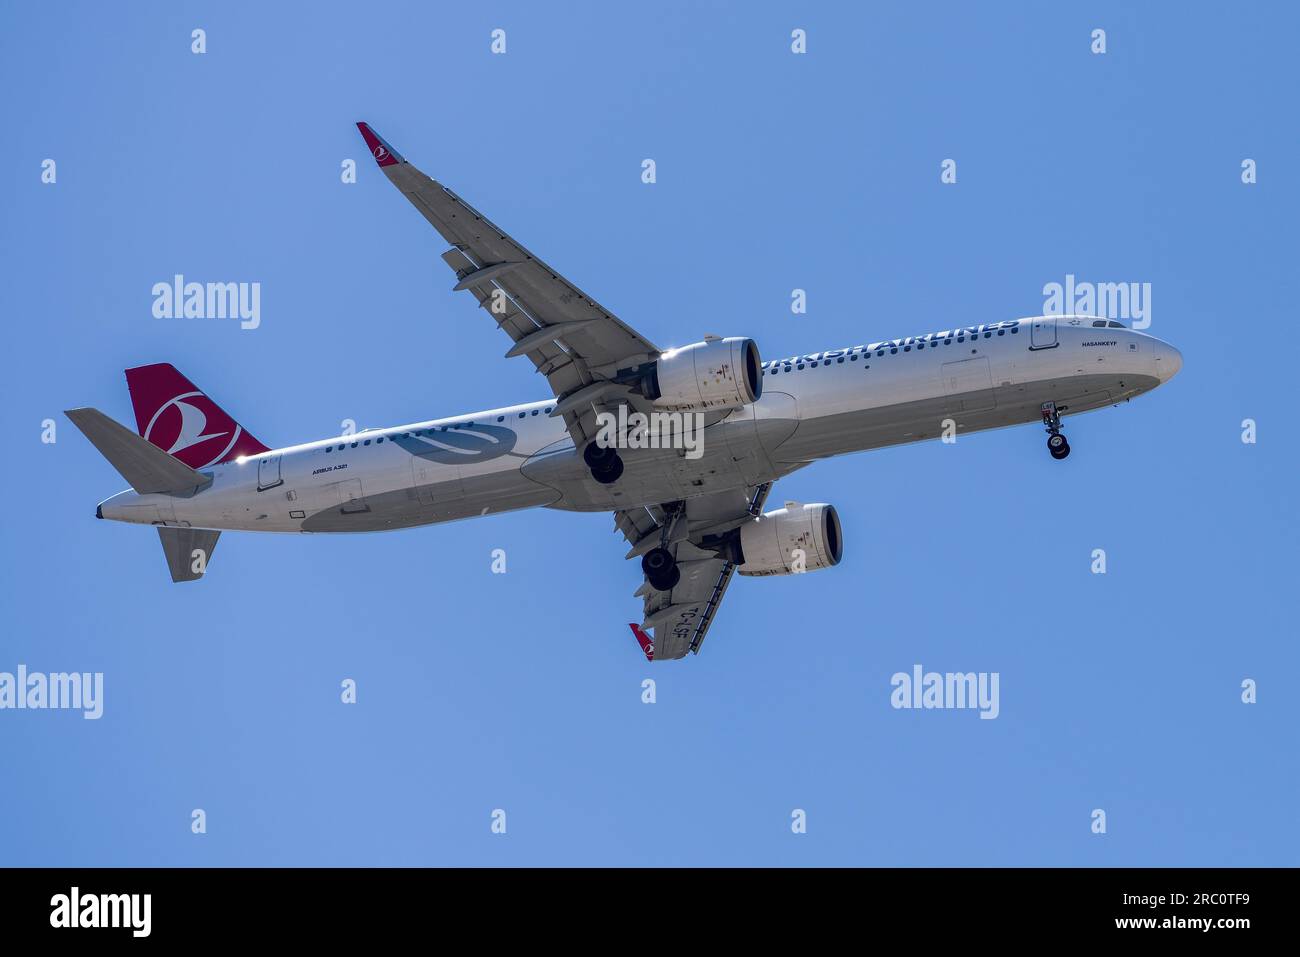 Lisbon, Portugal - July 12, 2023: Turkish Airlines with aircraft Airbus A321 approaching to land at Lisbon International Airport against blue sky Stock Photo